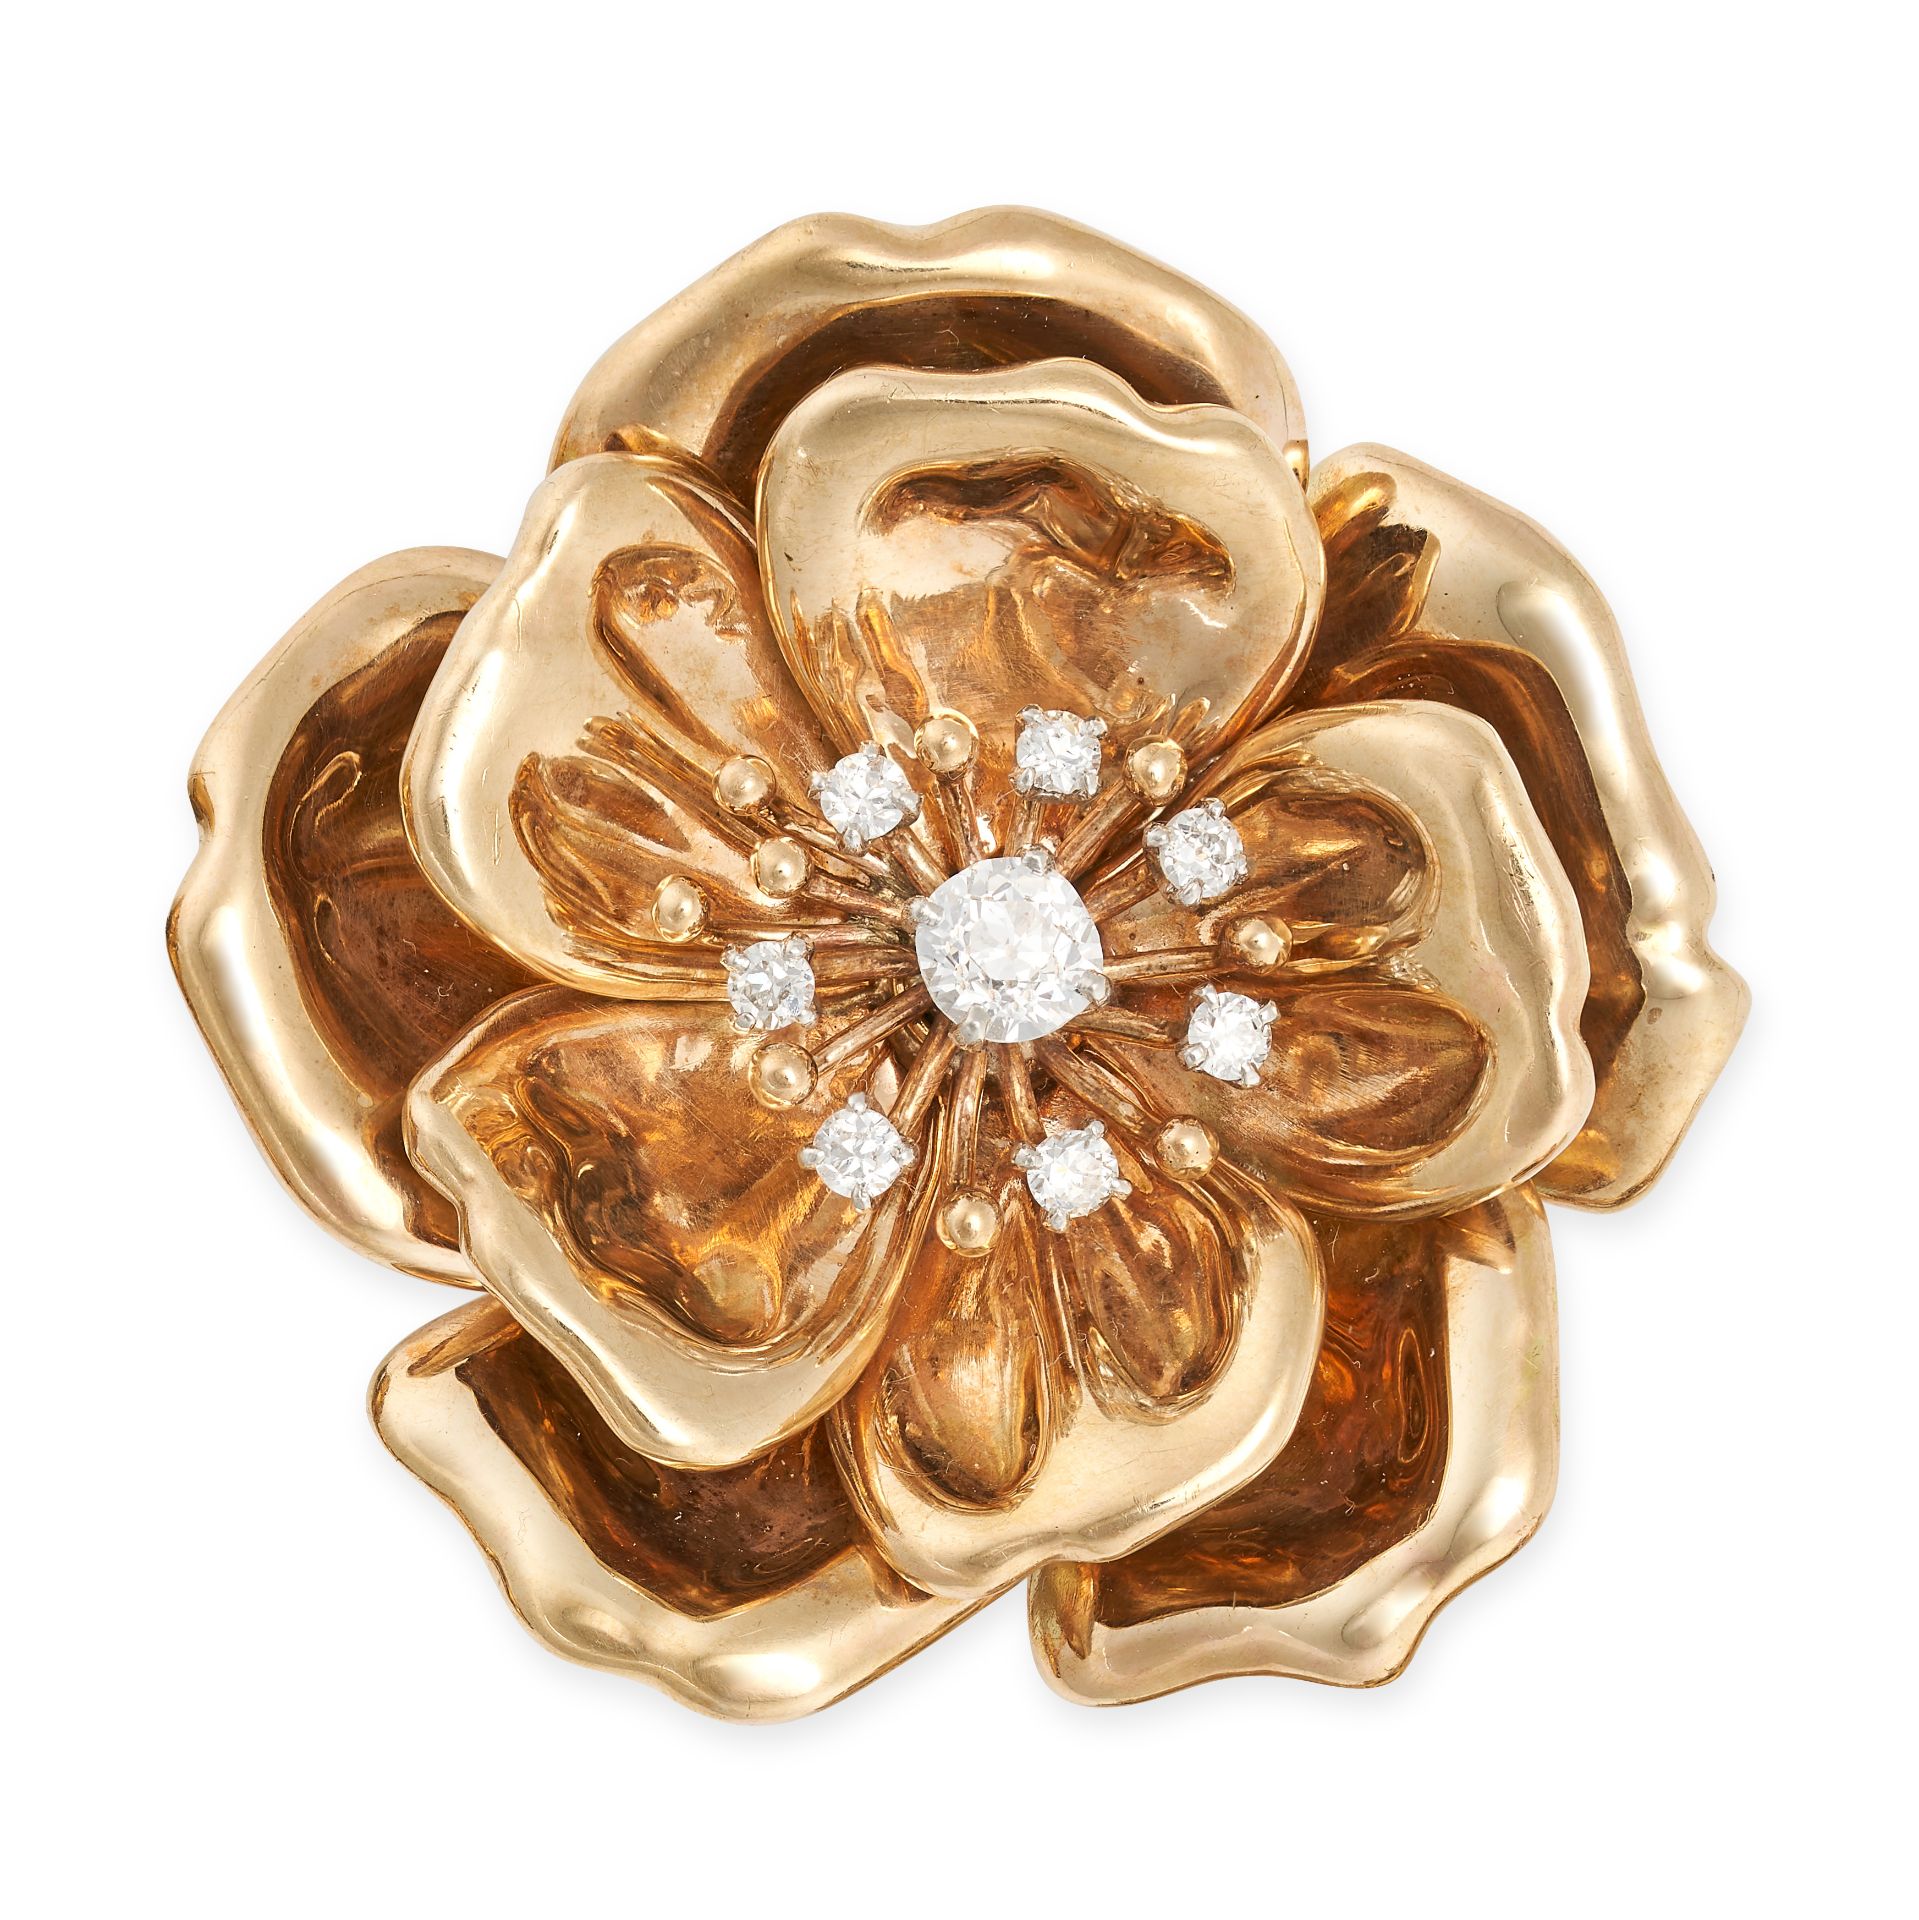 CARTIER, A VINTAGE DIAMOND FLOWER BROOCH in 18ct yellow gold, designed as a rose, set to the cent...